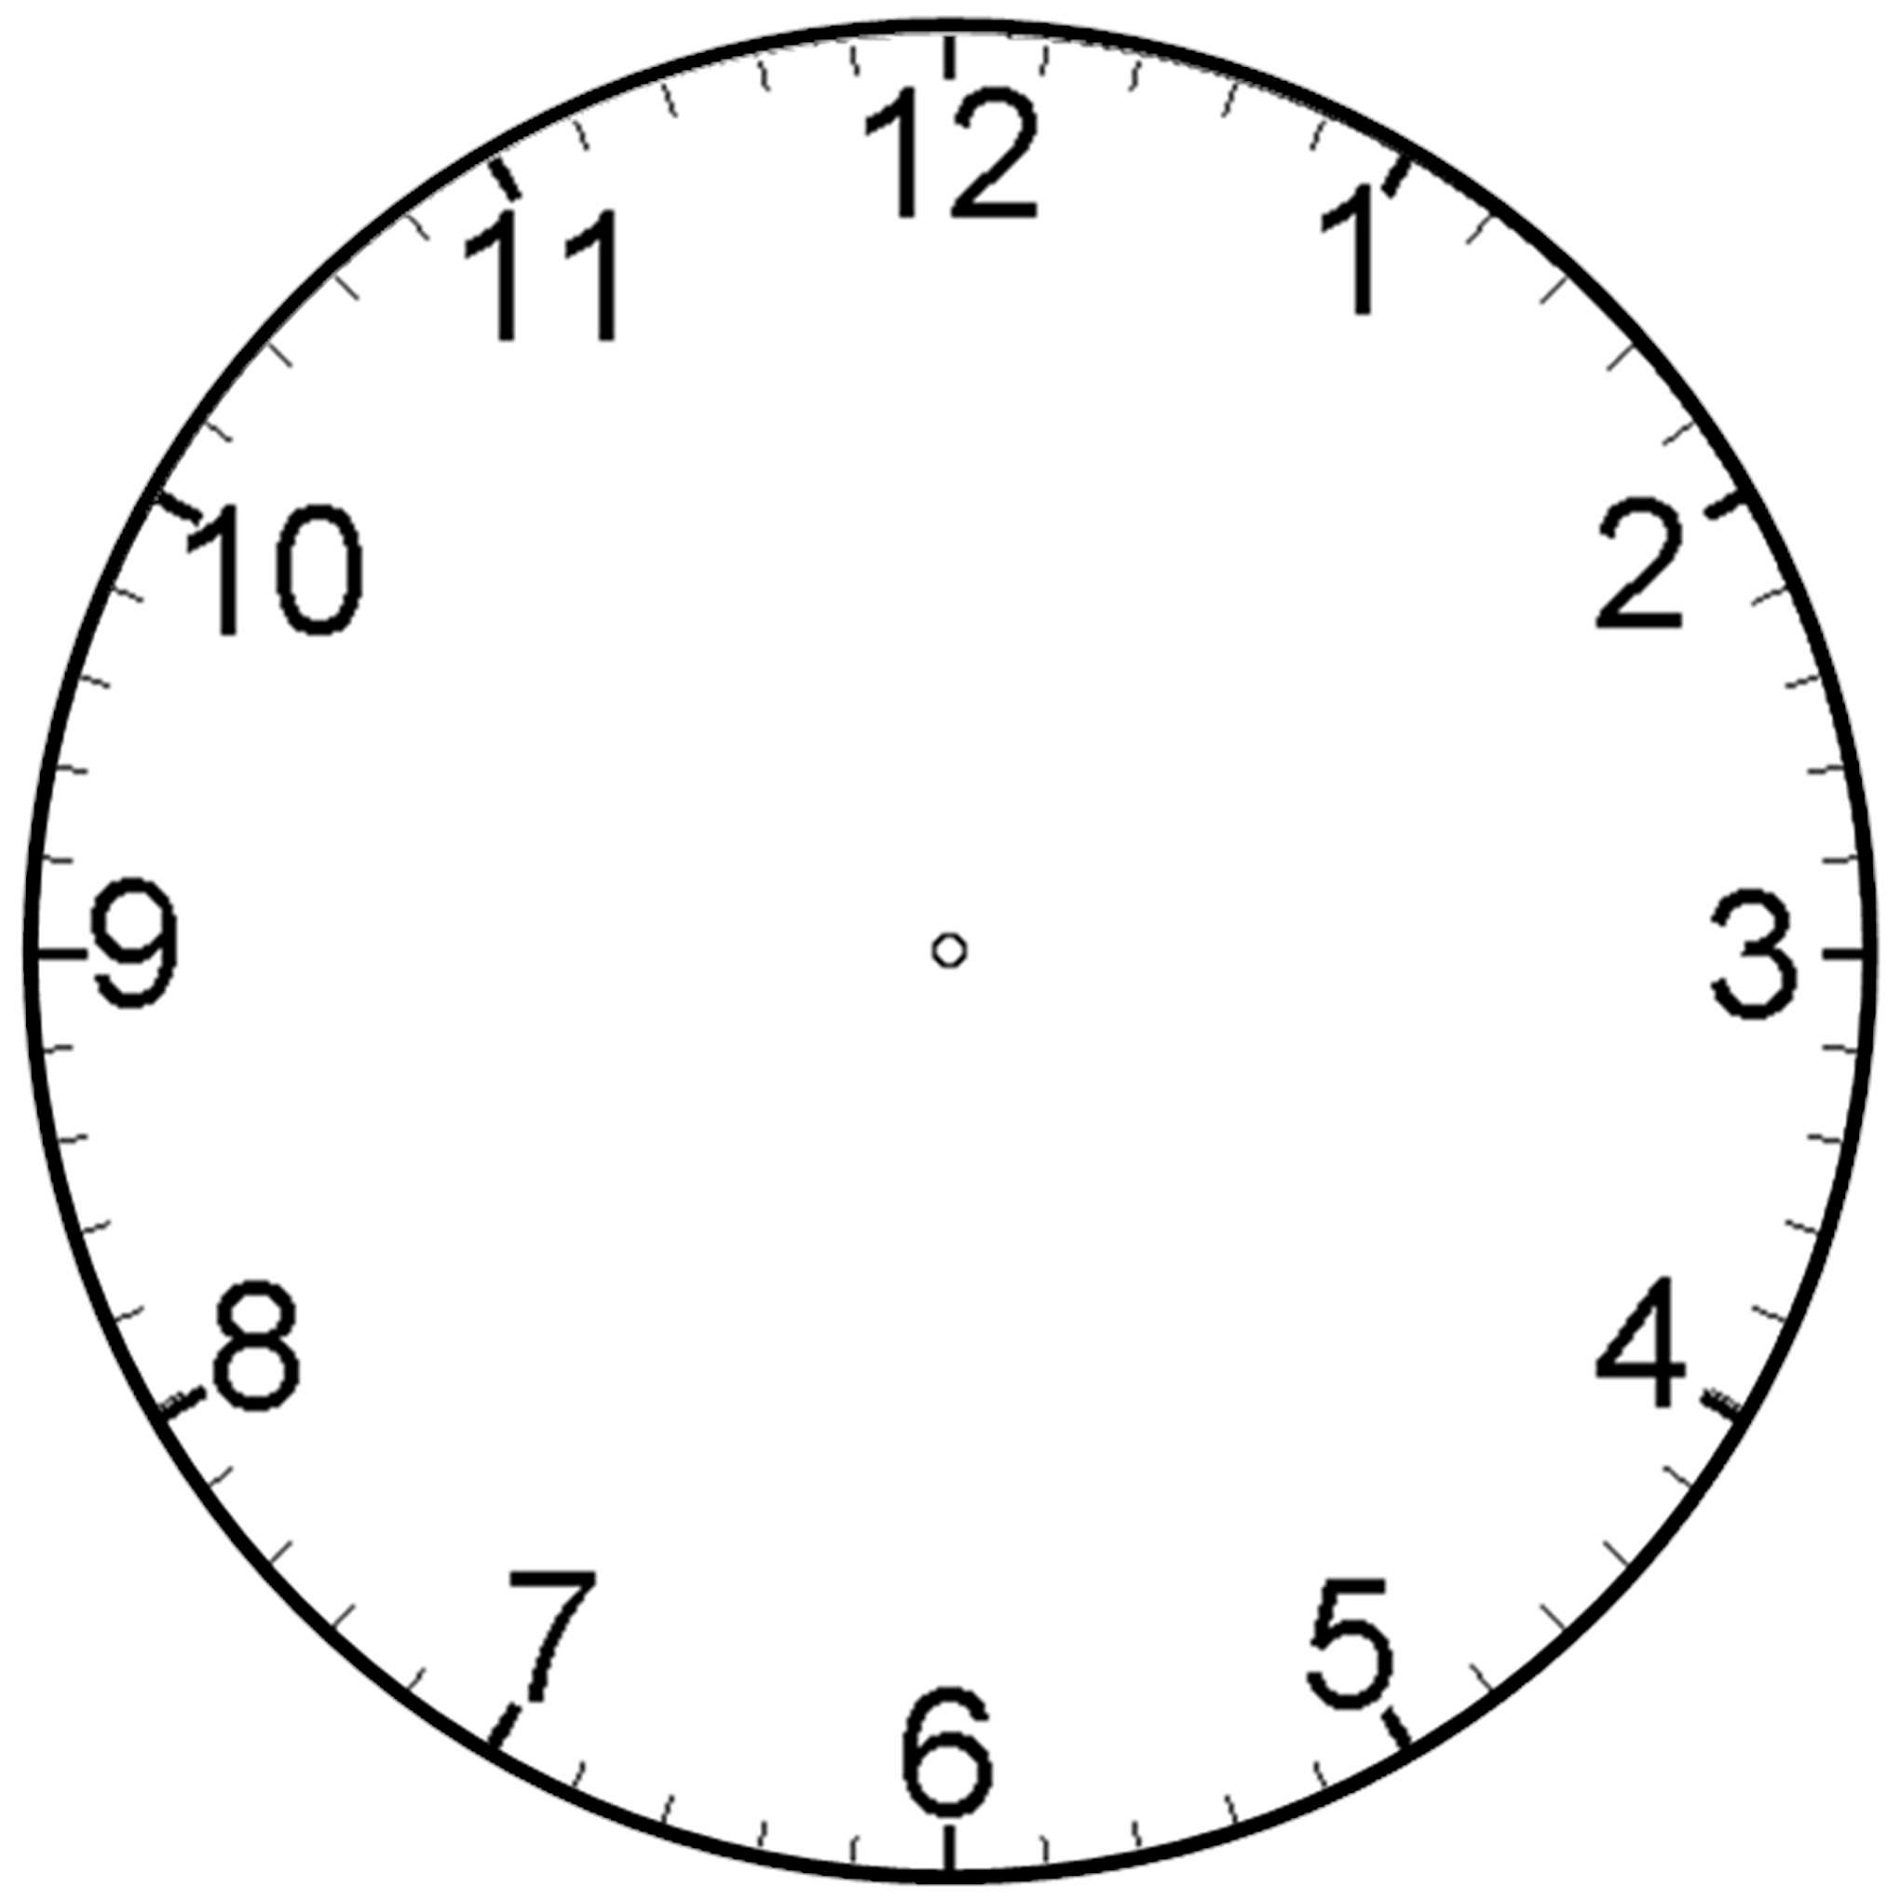 Blank Clock Faces for Exercises | Activity Shelter